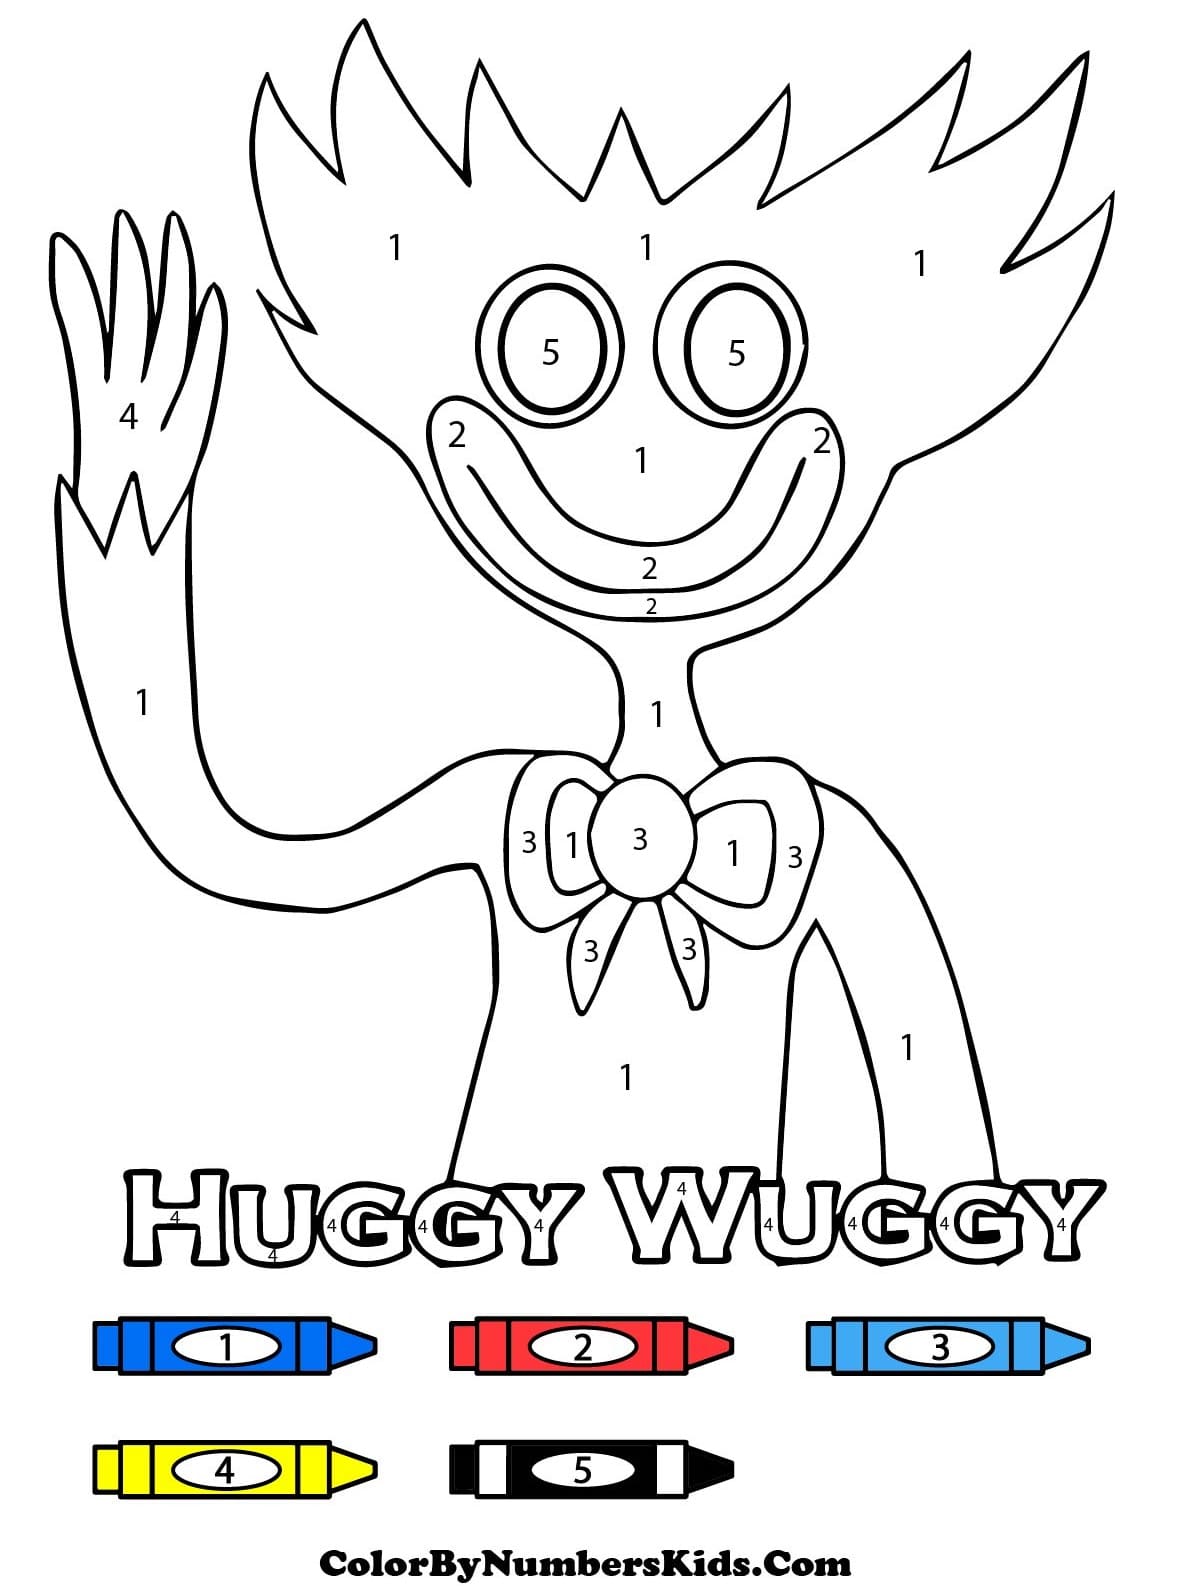 Friendly Huggy Wuggy Color By Number